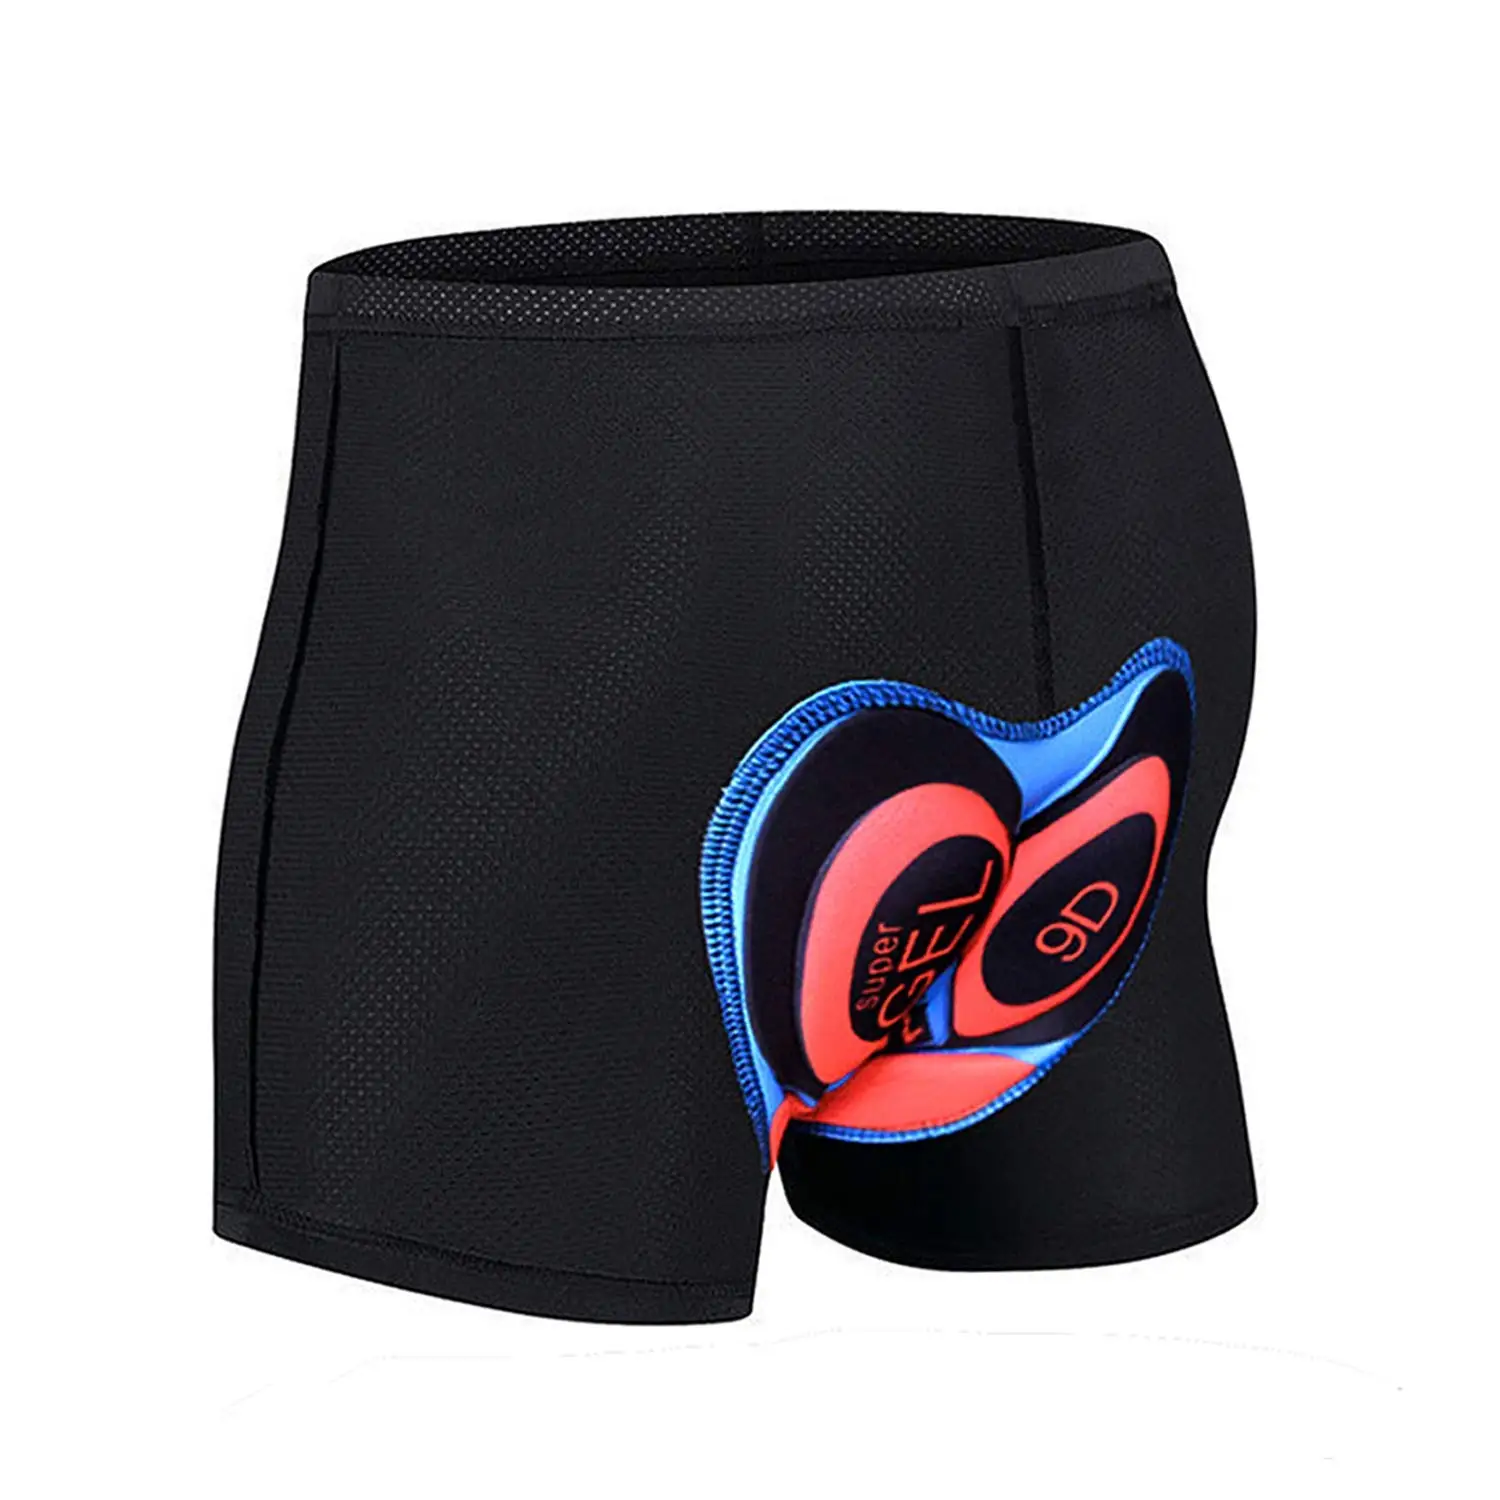 Cheap Slip With Shorts, find Slip With Shorts deals on line at Alibaba.com